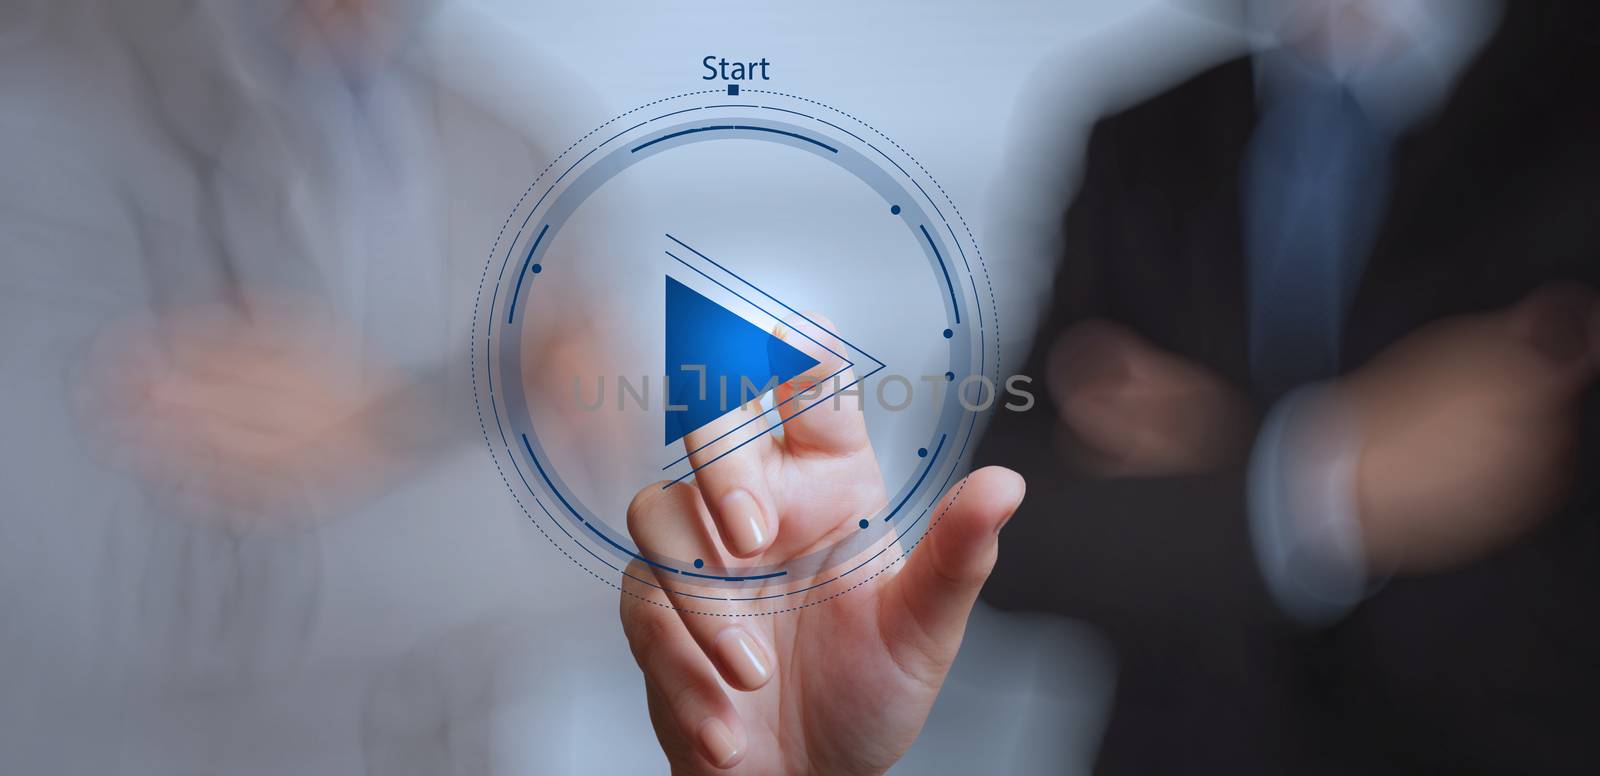 hand press play button sign to start or initiate projects with his team as concept 